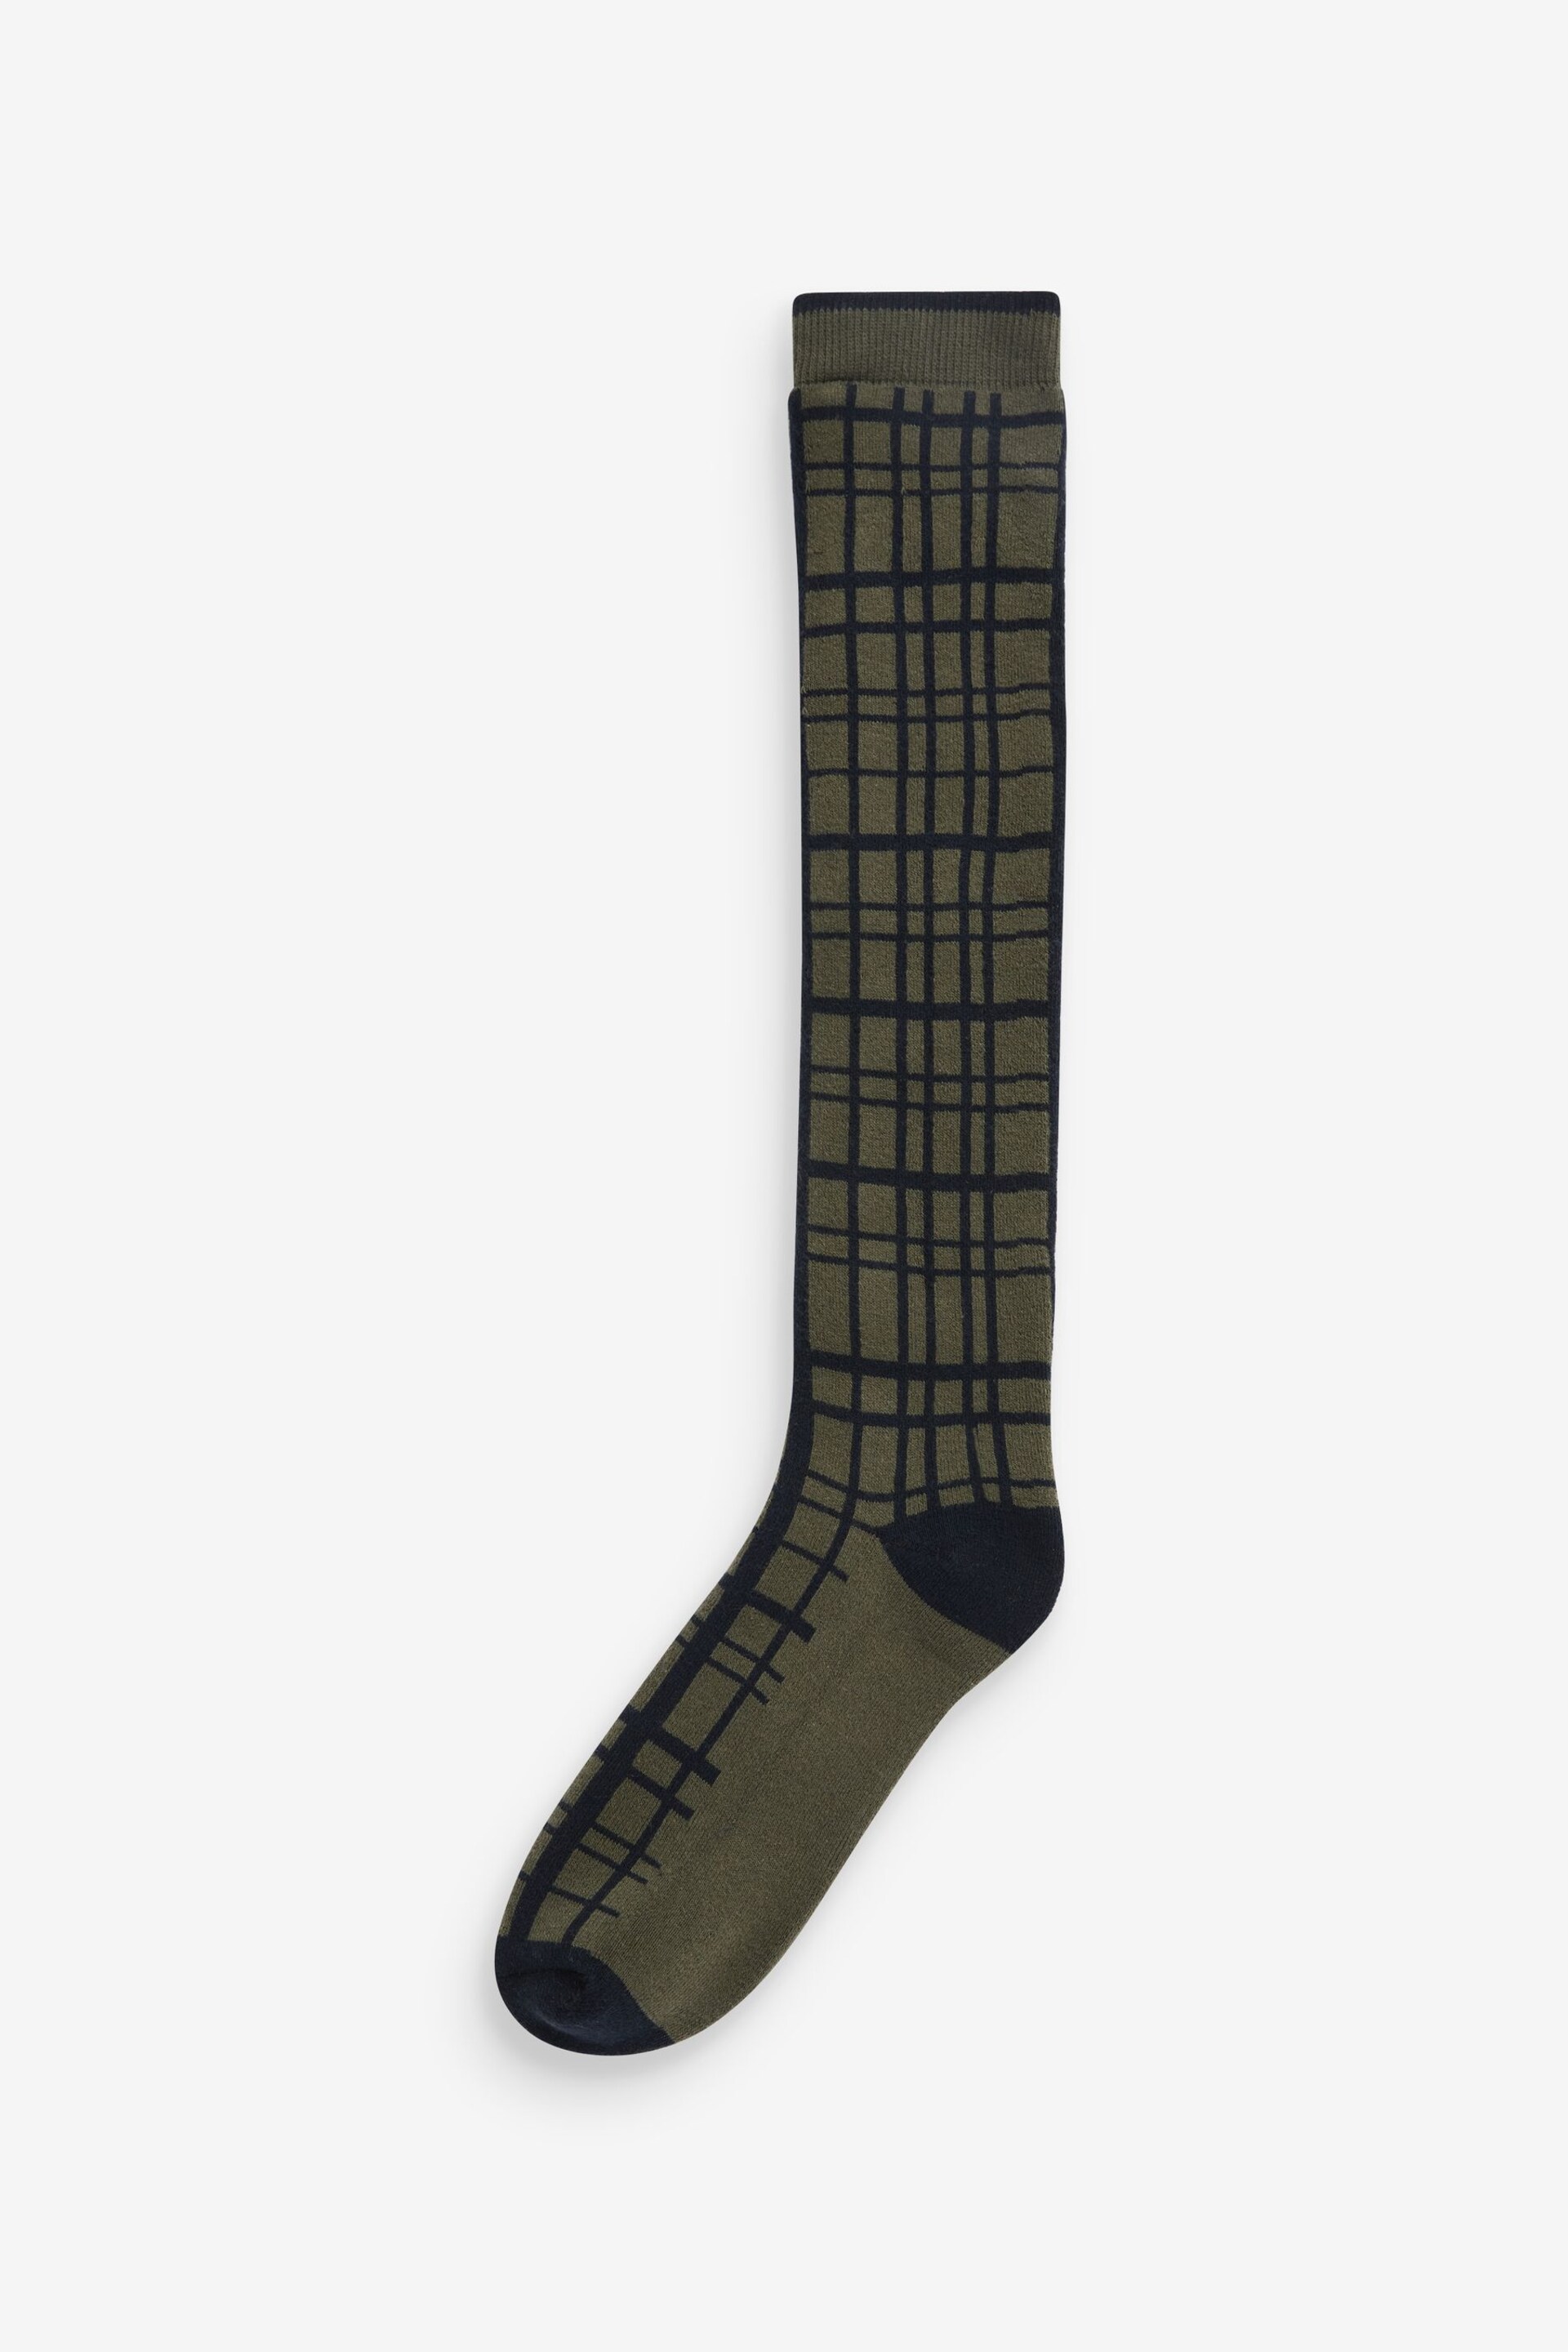 Green Check Welly Socks 2 Pack - Image 3 of 3